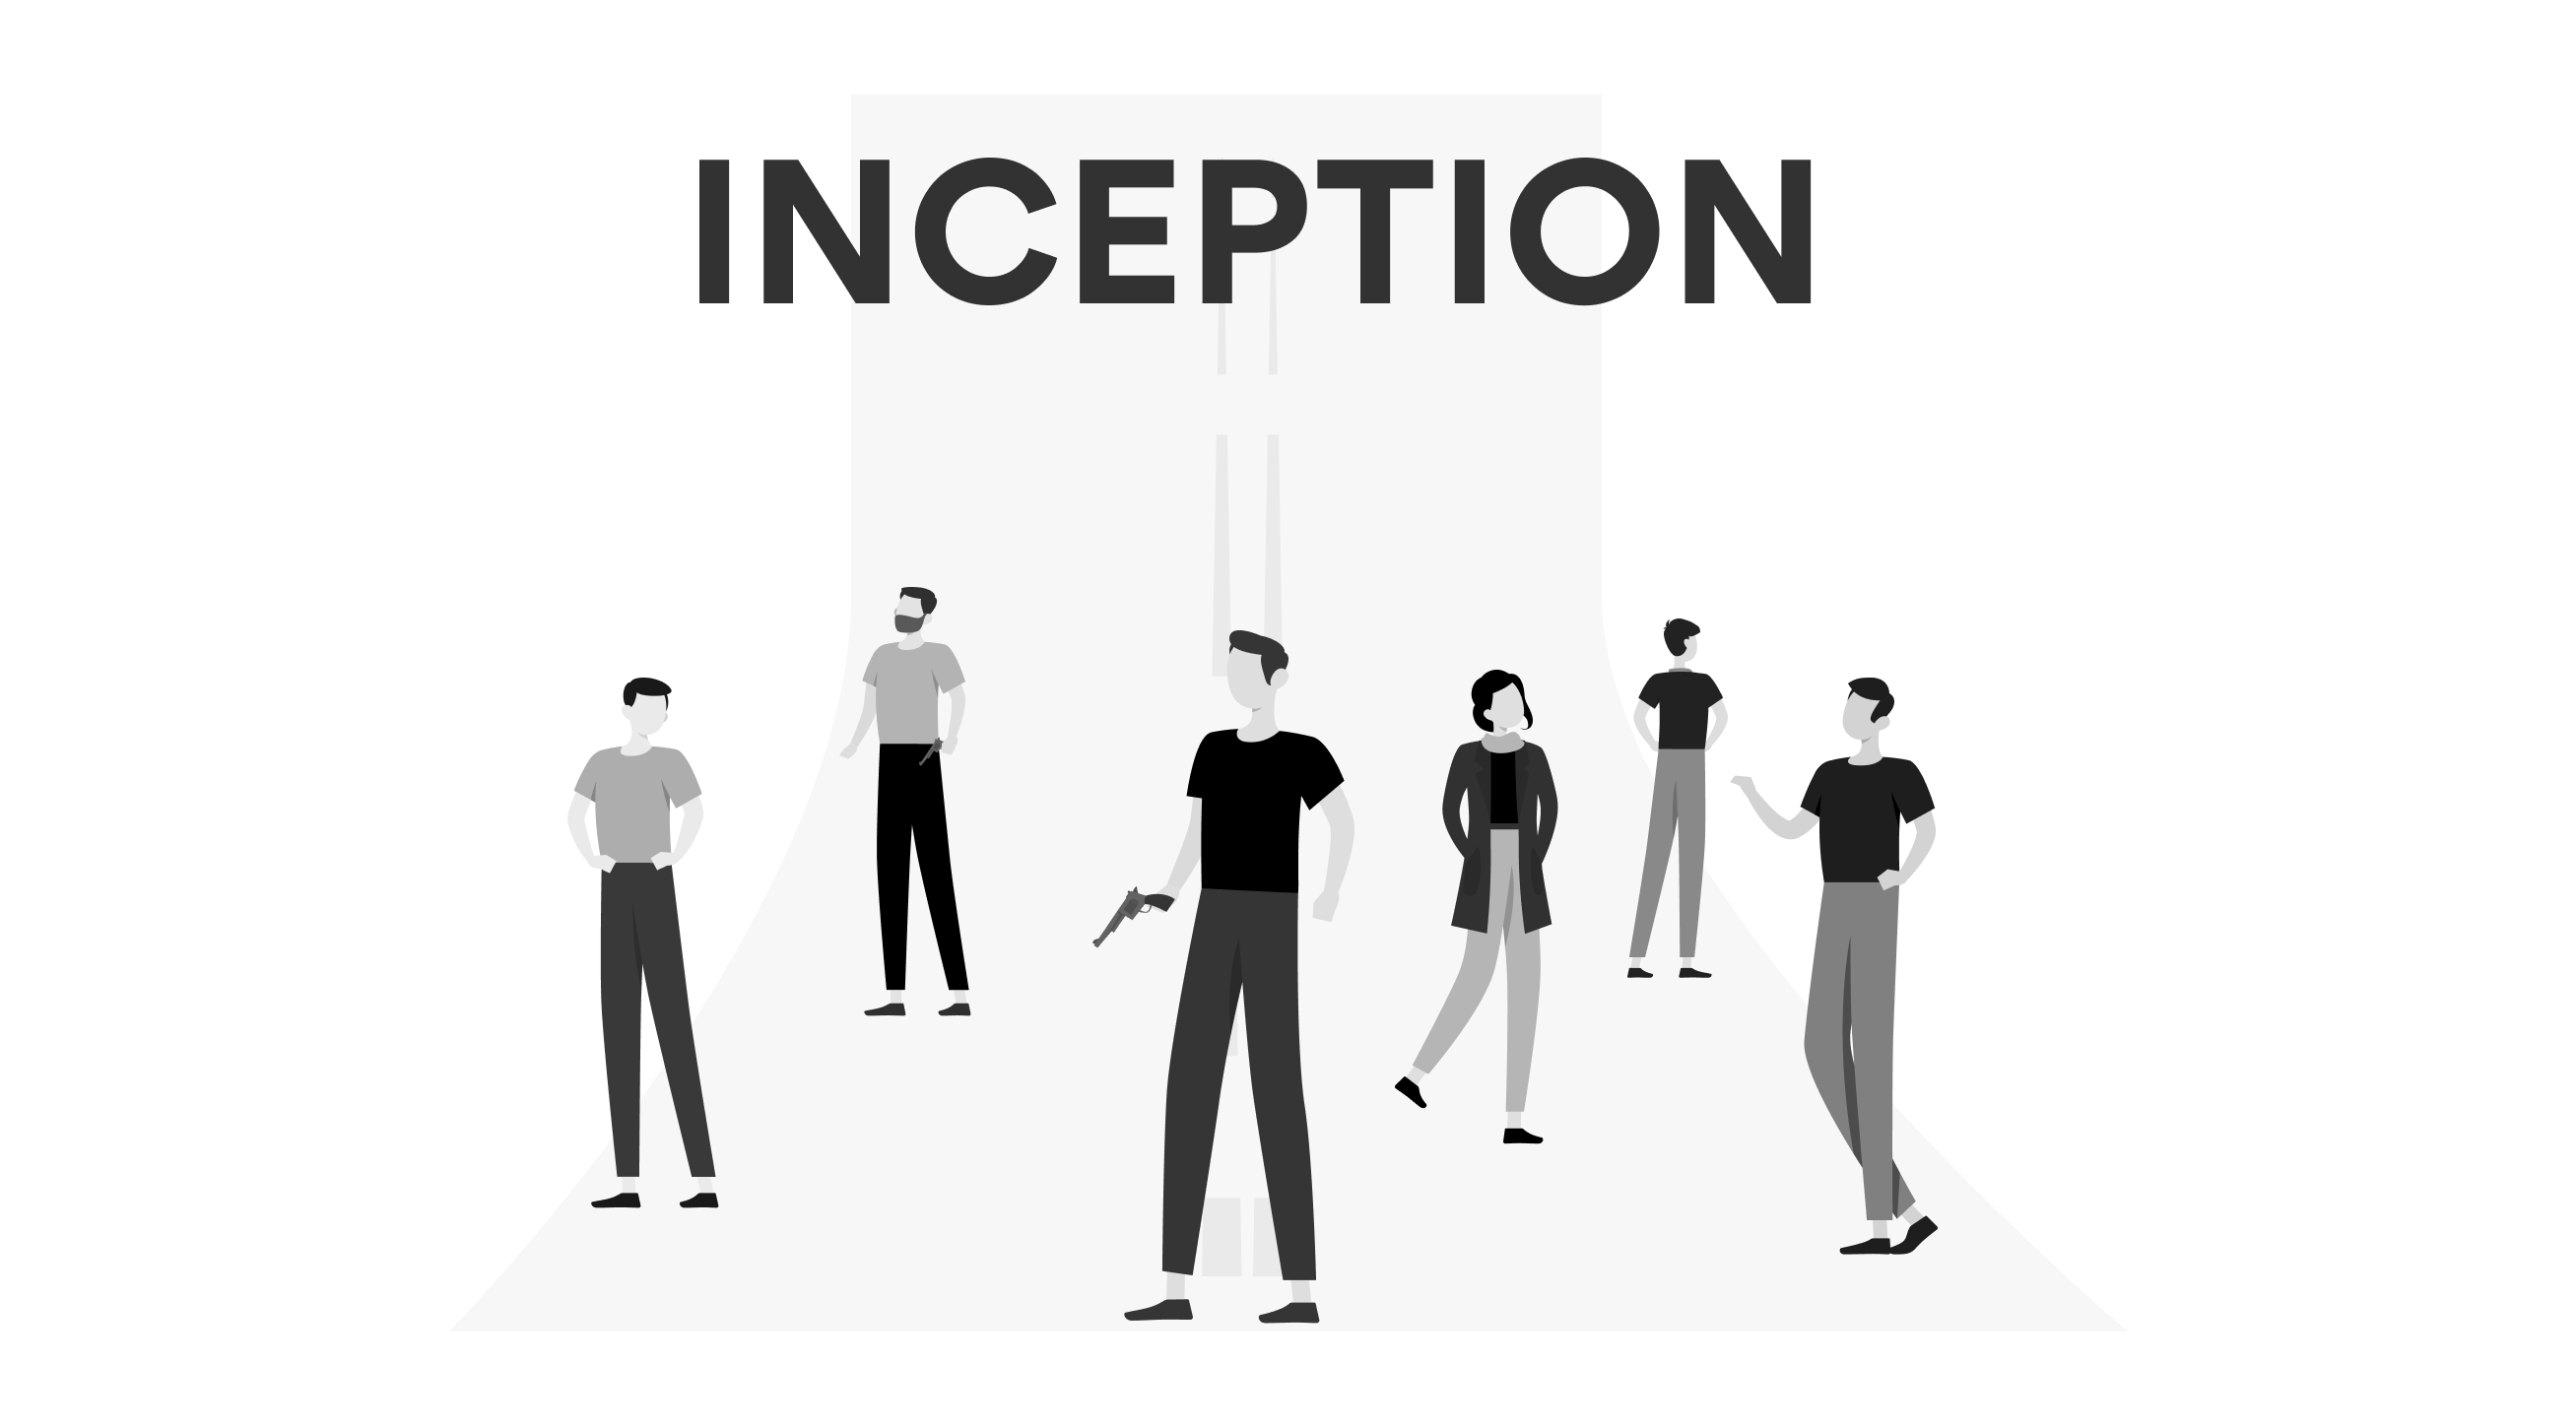 Is Inception portraying Lucid Dreaming correctly?